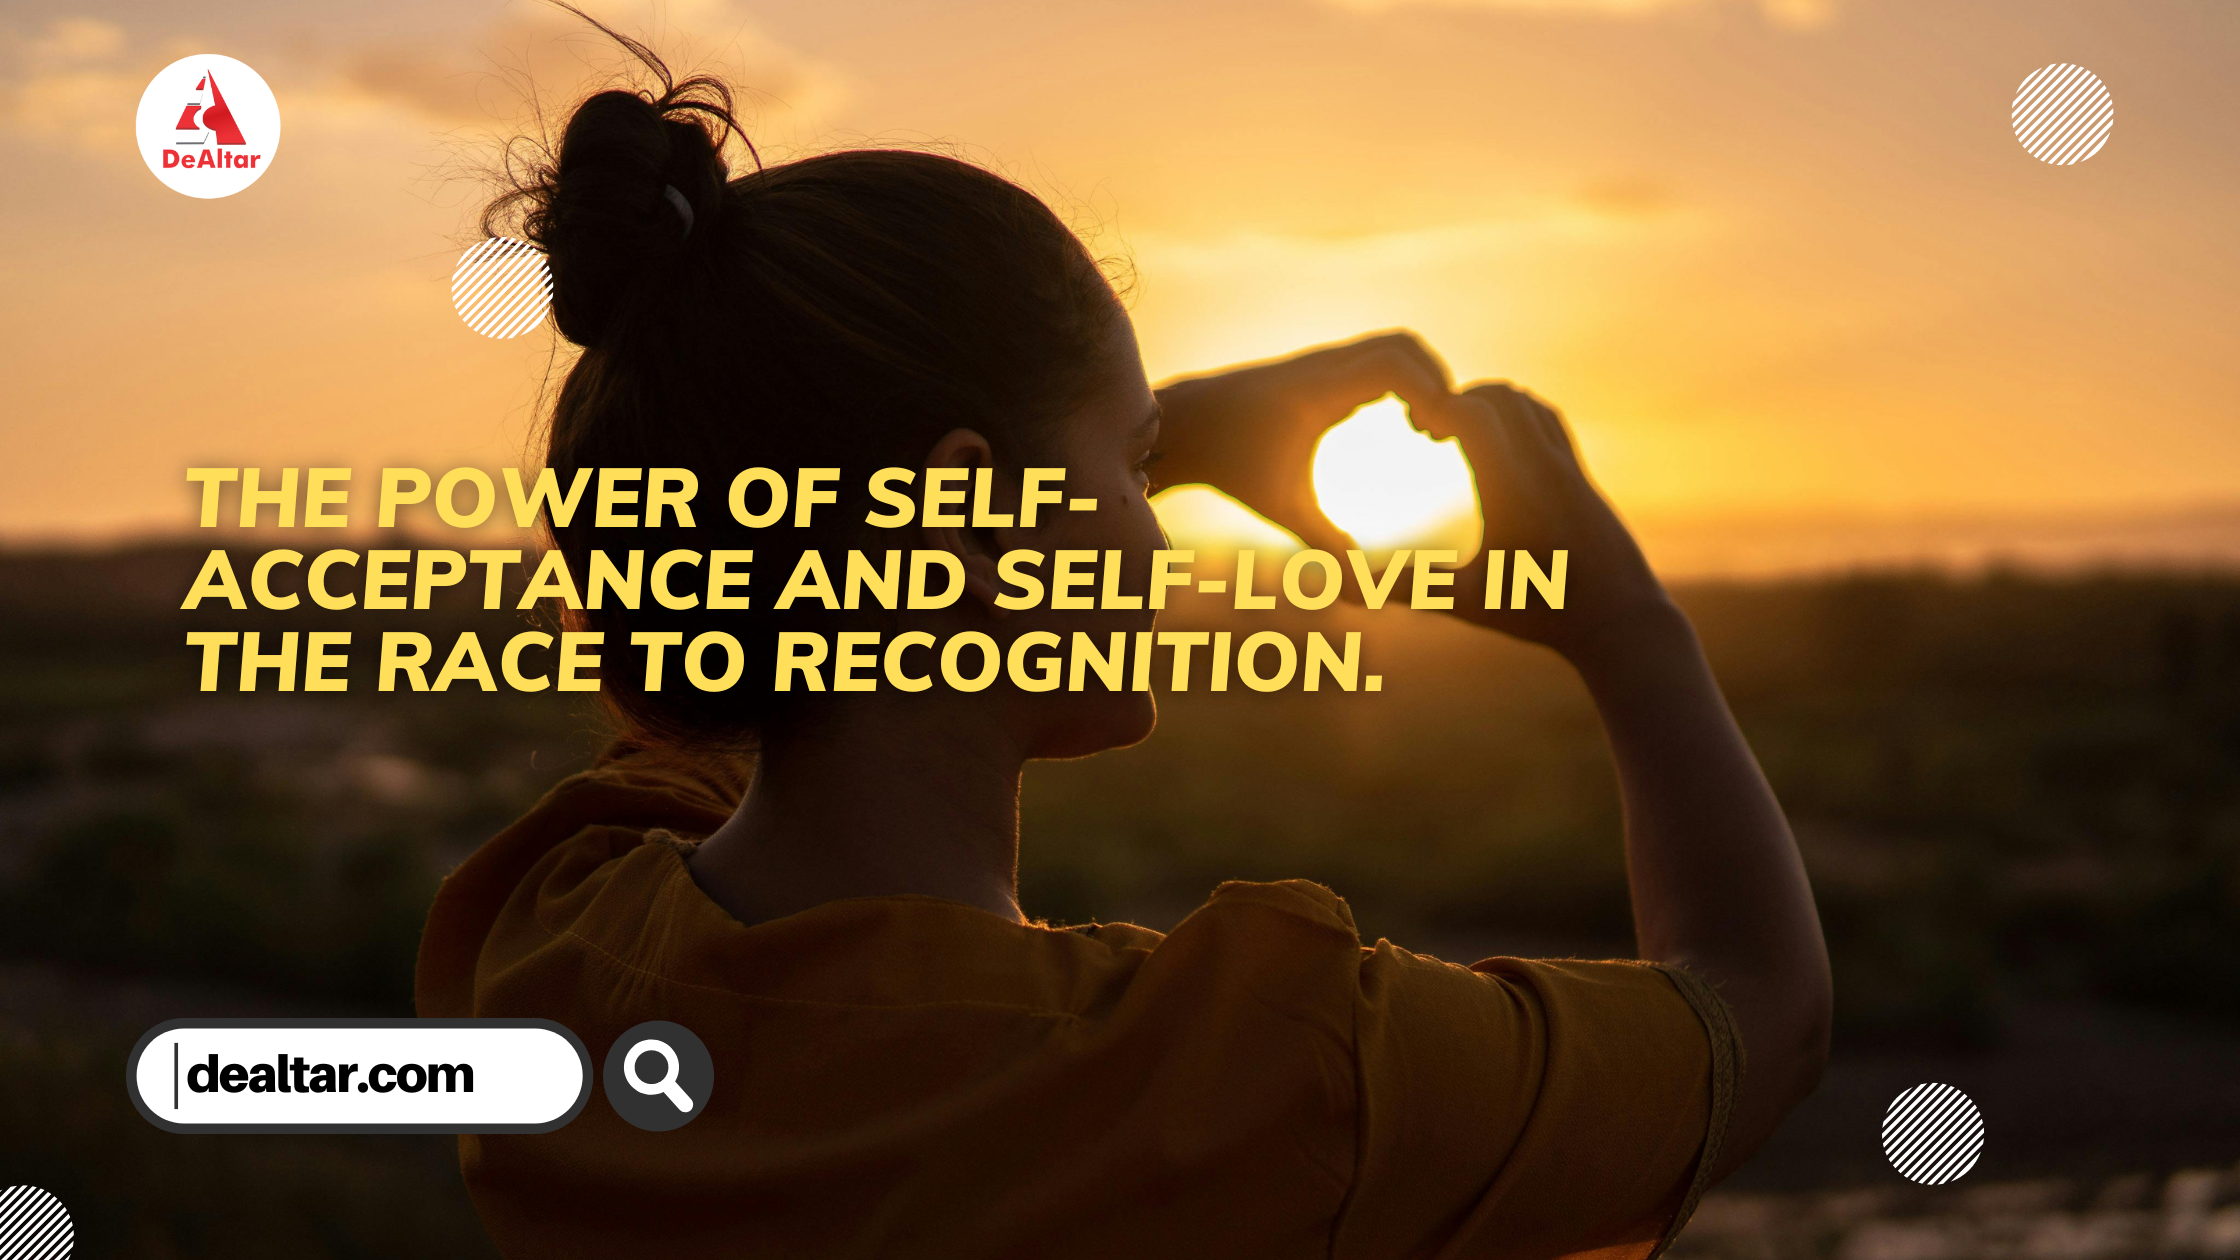 The power of self-acceptance and self-love in the race to recognition.